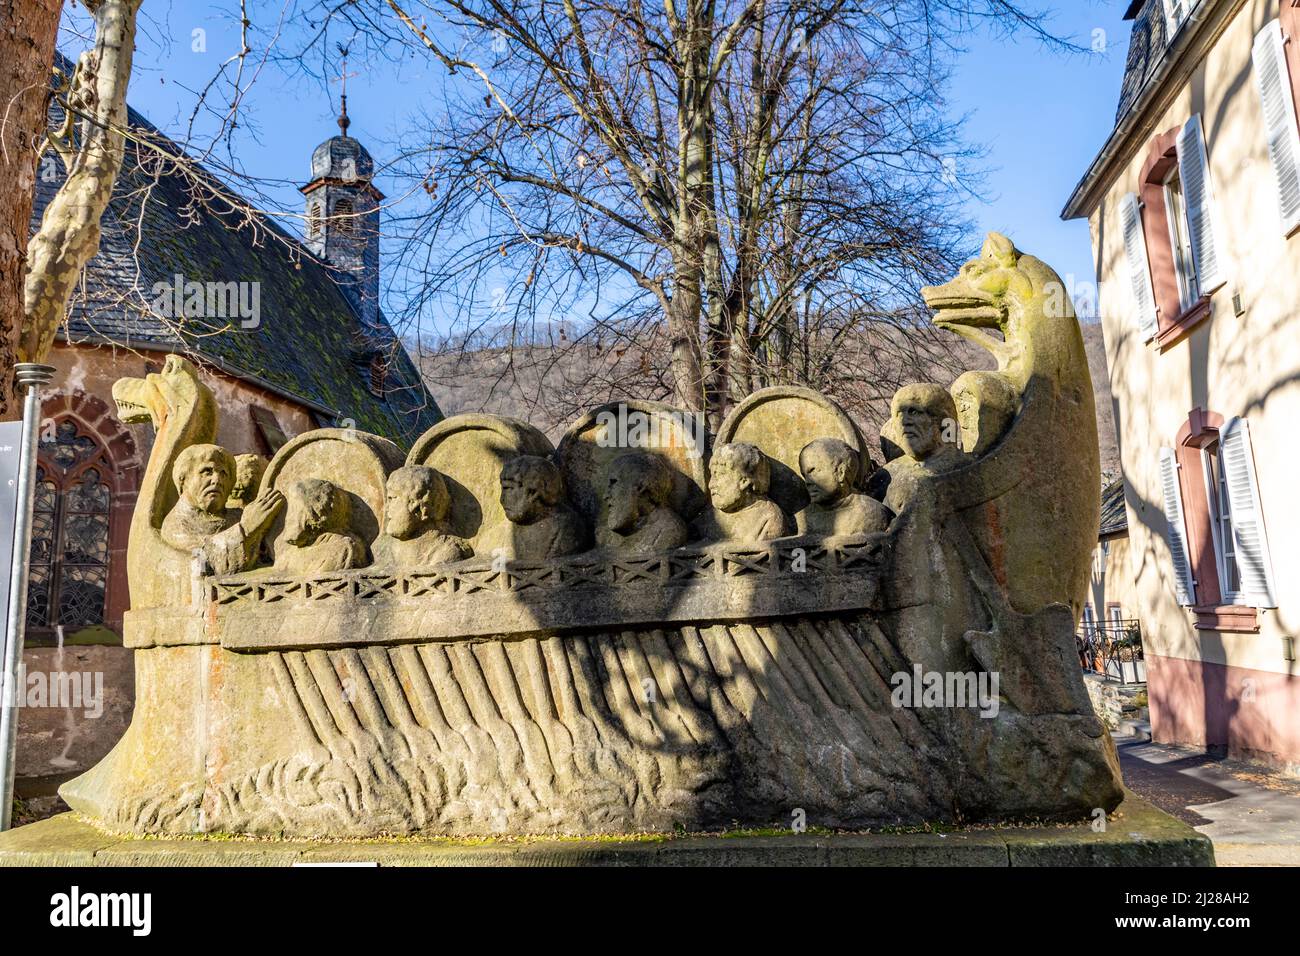 Neumagen, Germany - February 20, 2021: stone statue of  the ship of a wine merchant with barrels in Neumagen Dhron from roman times. Stock Photo